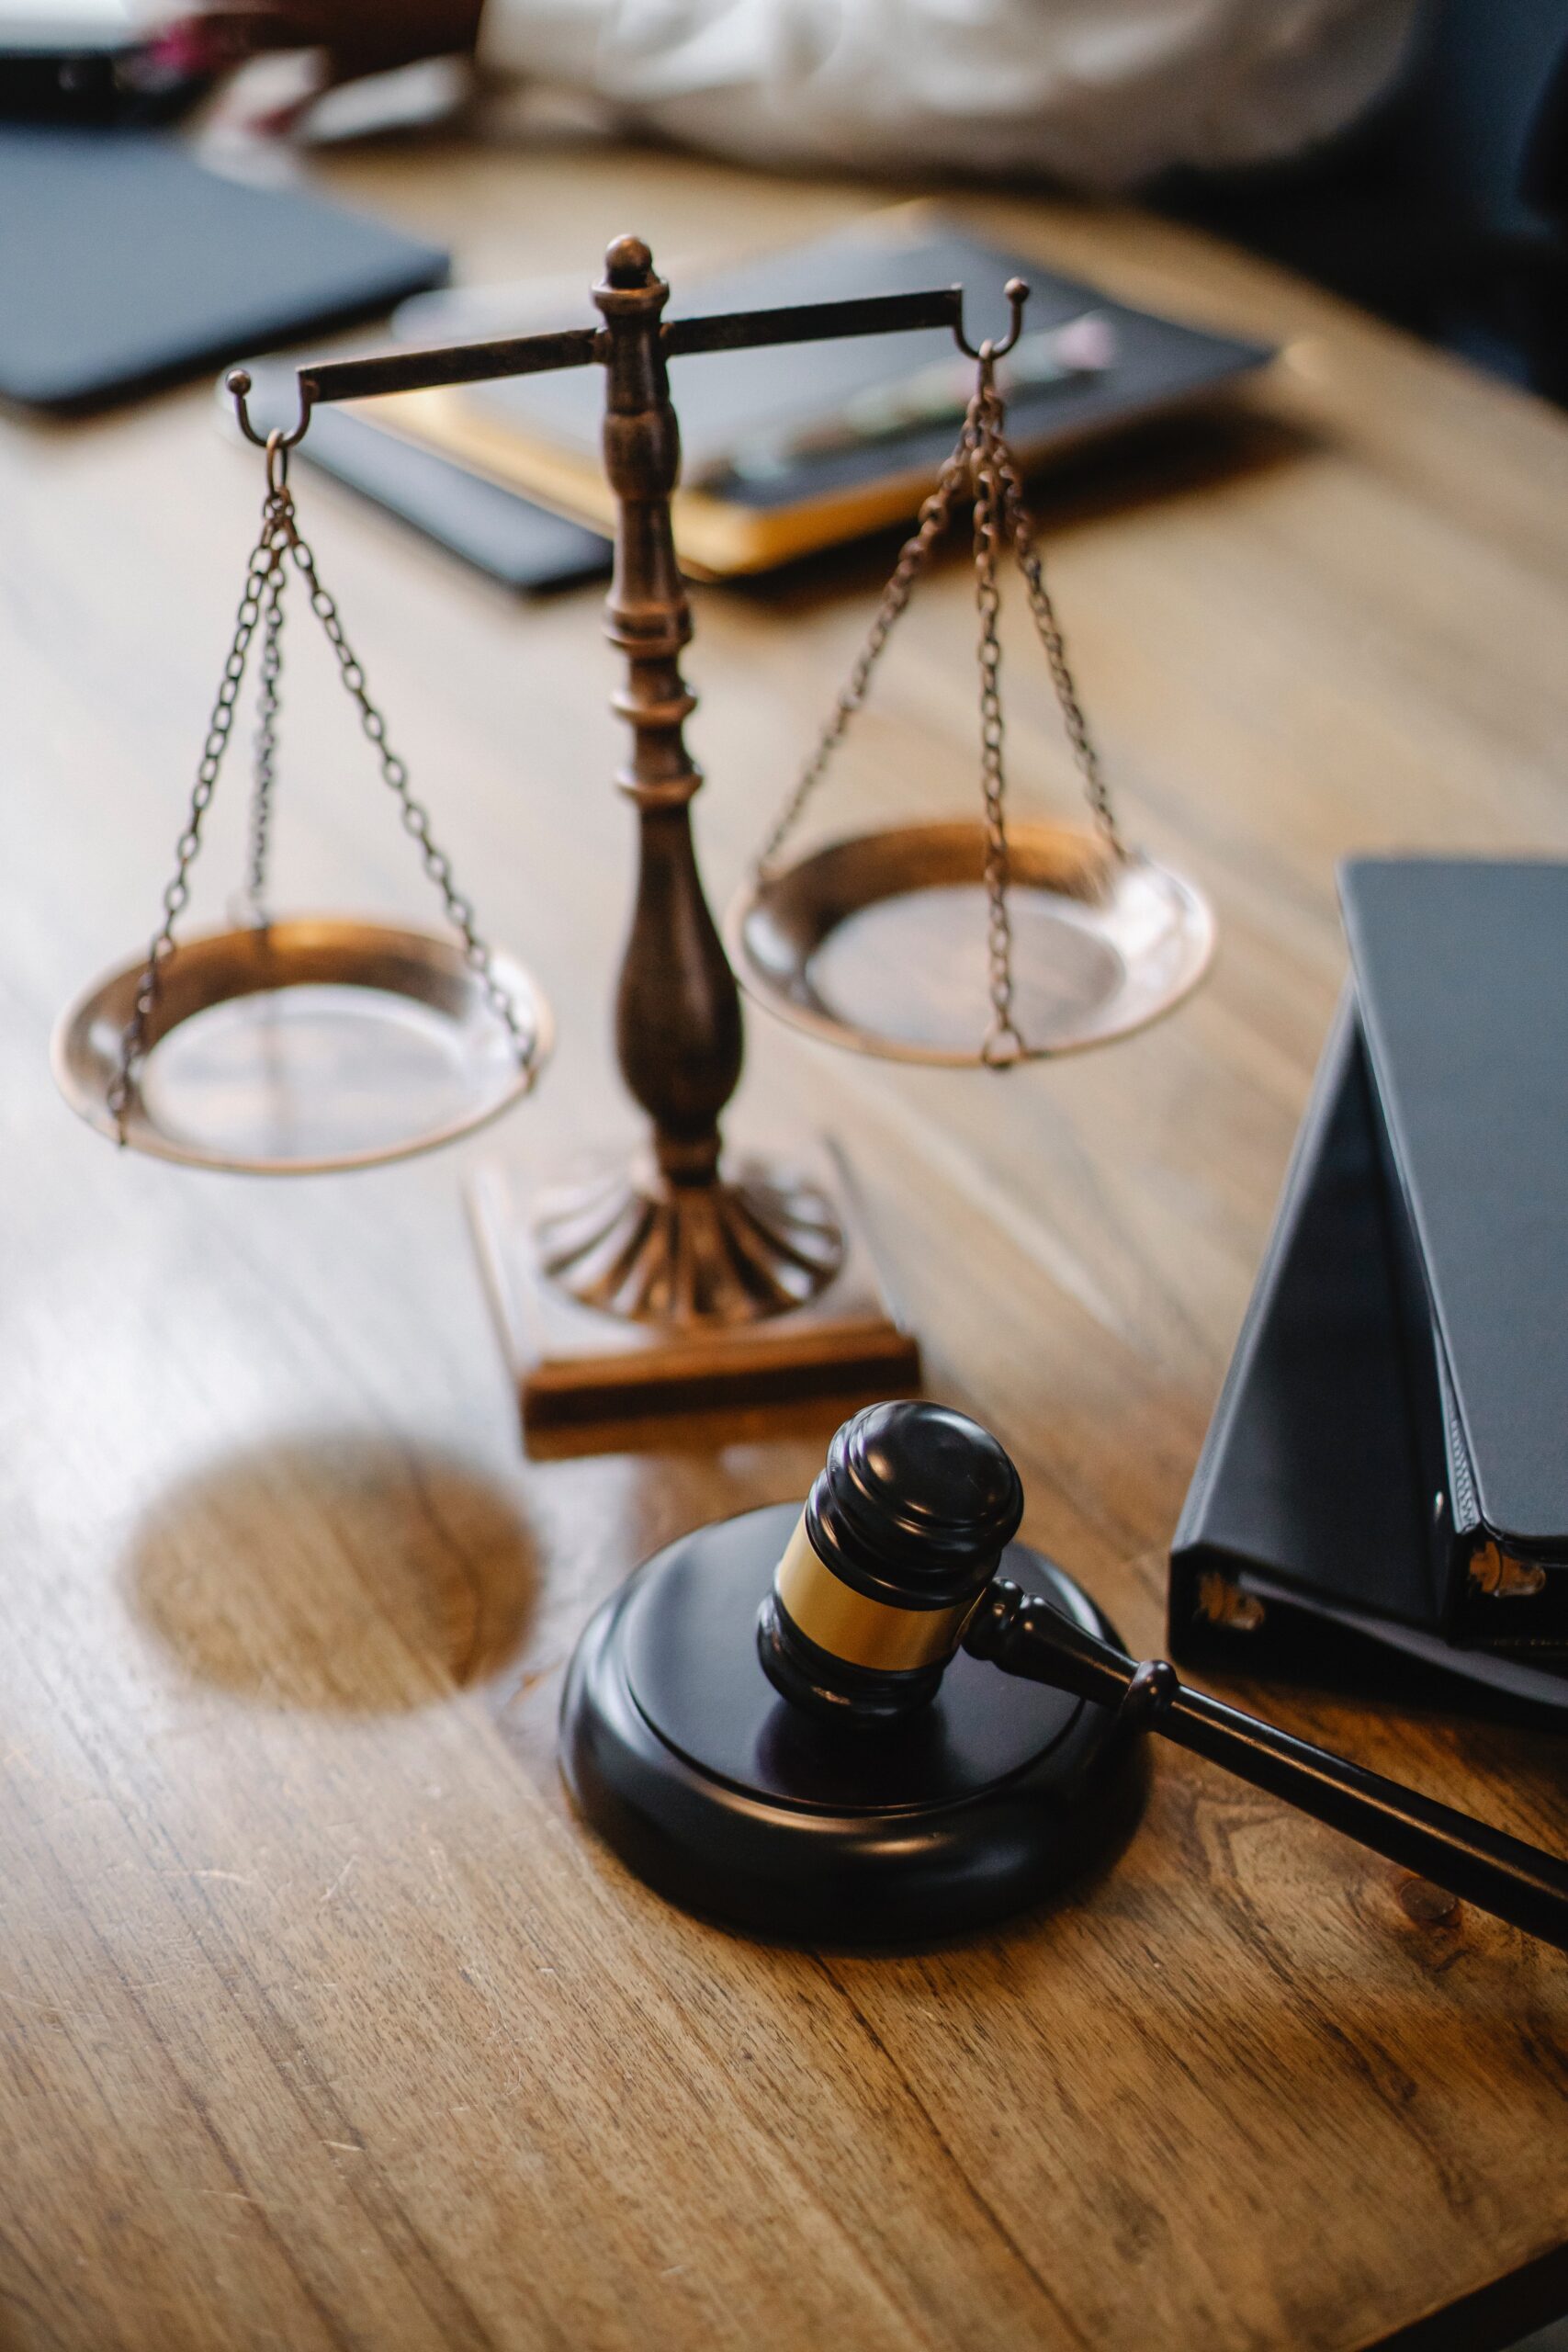 What Are Some Advantages To Litigation?